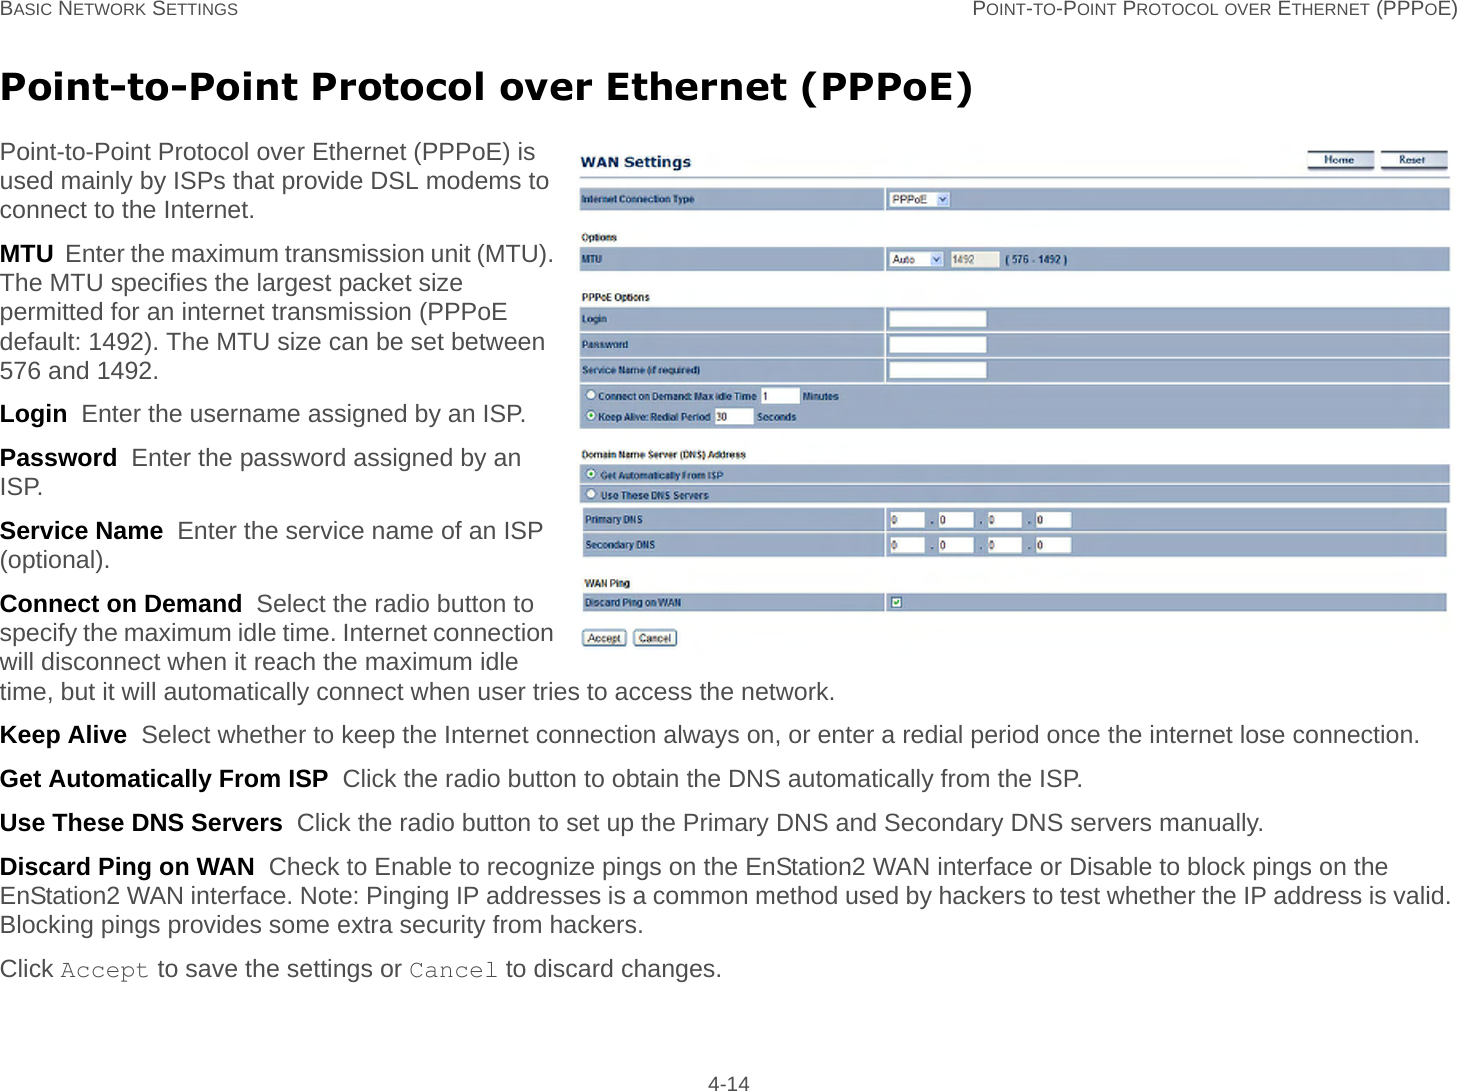 BASIC NETWORK SETTINGS POINT-TO-POINT PROTOCOL OVER ETHERNET (PPPOE) 4-14Point-to-Point Protocol over Ethernet (PPPoE)Point-to-Point Protocol over Ethernet (PPPoE) is used mainly by ISPs that provide DSL modems to connect to the Internet.MTU  Enter the maximum transmission unit (MTU). The MTU specifies the largest packet size permitted for an internet transmission (PPPoE default: 1492). The MTU size can be set between 576 and 1492.Login  Enter the username assigned by an ISP.Password  Enter the password assigned by an ISP.Service Name  Enter the service name of an ISP (optional).Connect on Demand  Select the radio button to specify the maximum idle time. Internet connection will disconnect when it reach the maximum idle time, but it will automatically connect when user tries to access the network.Keep Alive  Select whether to keep the Internet connection always on, or enter a redial period once the internet lose connection.Get Automatically From ISP  Click the radio button to obtain the DNS automatically from the ISP.Use These DNS Servers  Click the radio button to set up the Primary DNS and Secondary DNS servers manually.Discard Ping on WAN  Check to Enable to recognize pings on the EnStation2 WAN interface or Disable to block pings on the EnStation2 WAN interface. Note: Pinging IP addresses is a common method used by hackers to test whether the IP address is valid. Blocking pings provides some extra security from hackers.Click Accept to save the settings or Cancel to discard changes.